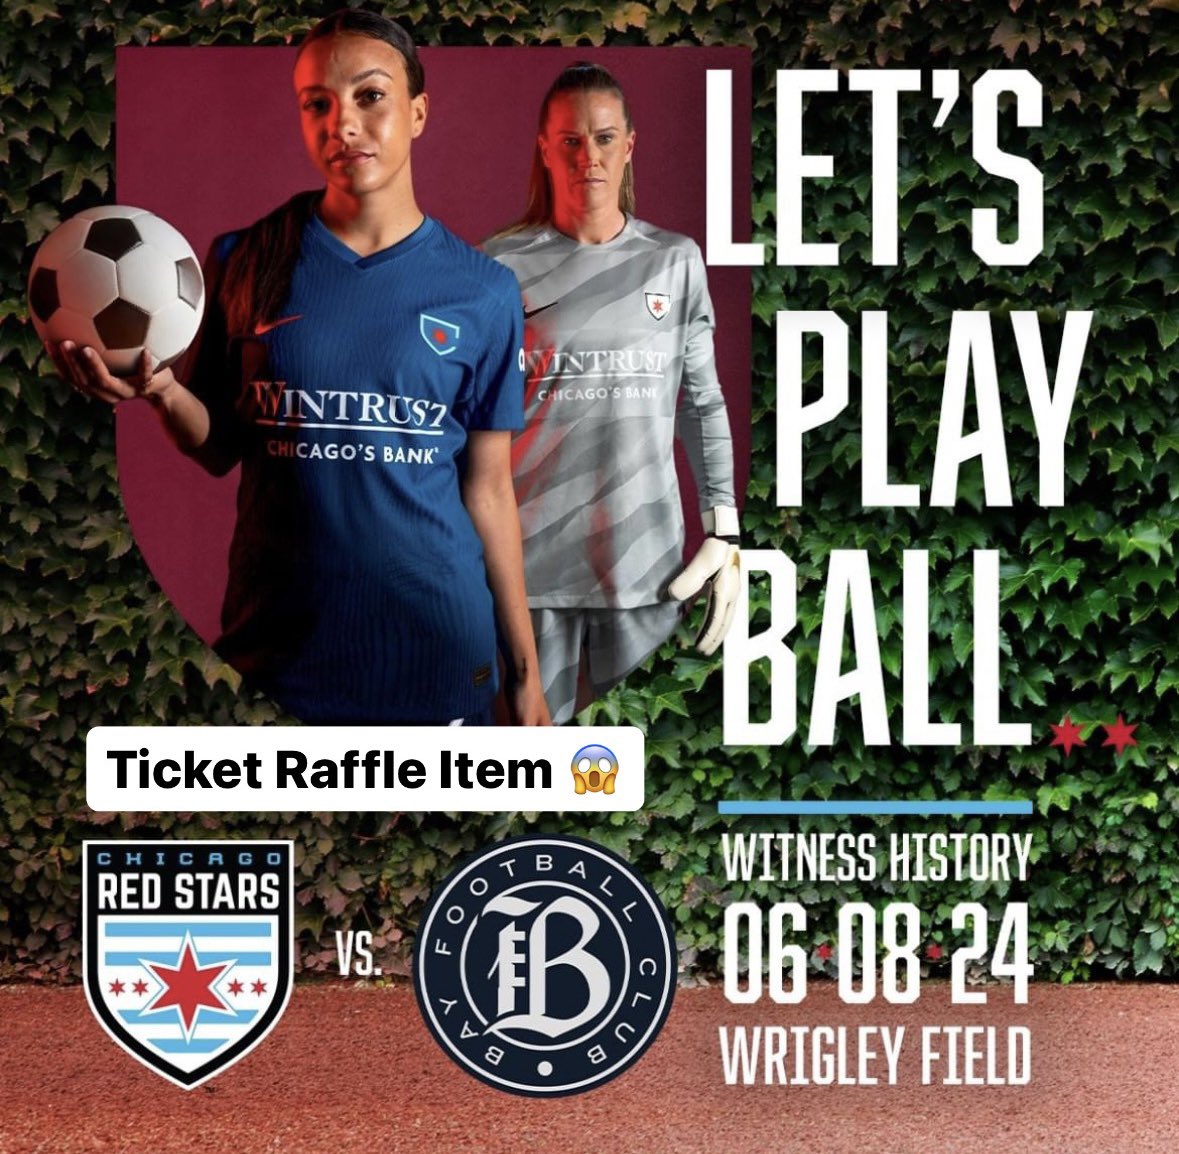 This will be a HOT item and open to anyone to bid on in our online silent auction. Tickets will be in section 107. Doors open at 5. Thank you @chicagoredstars!